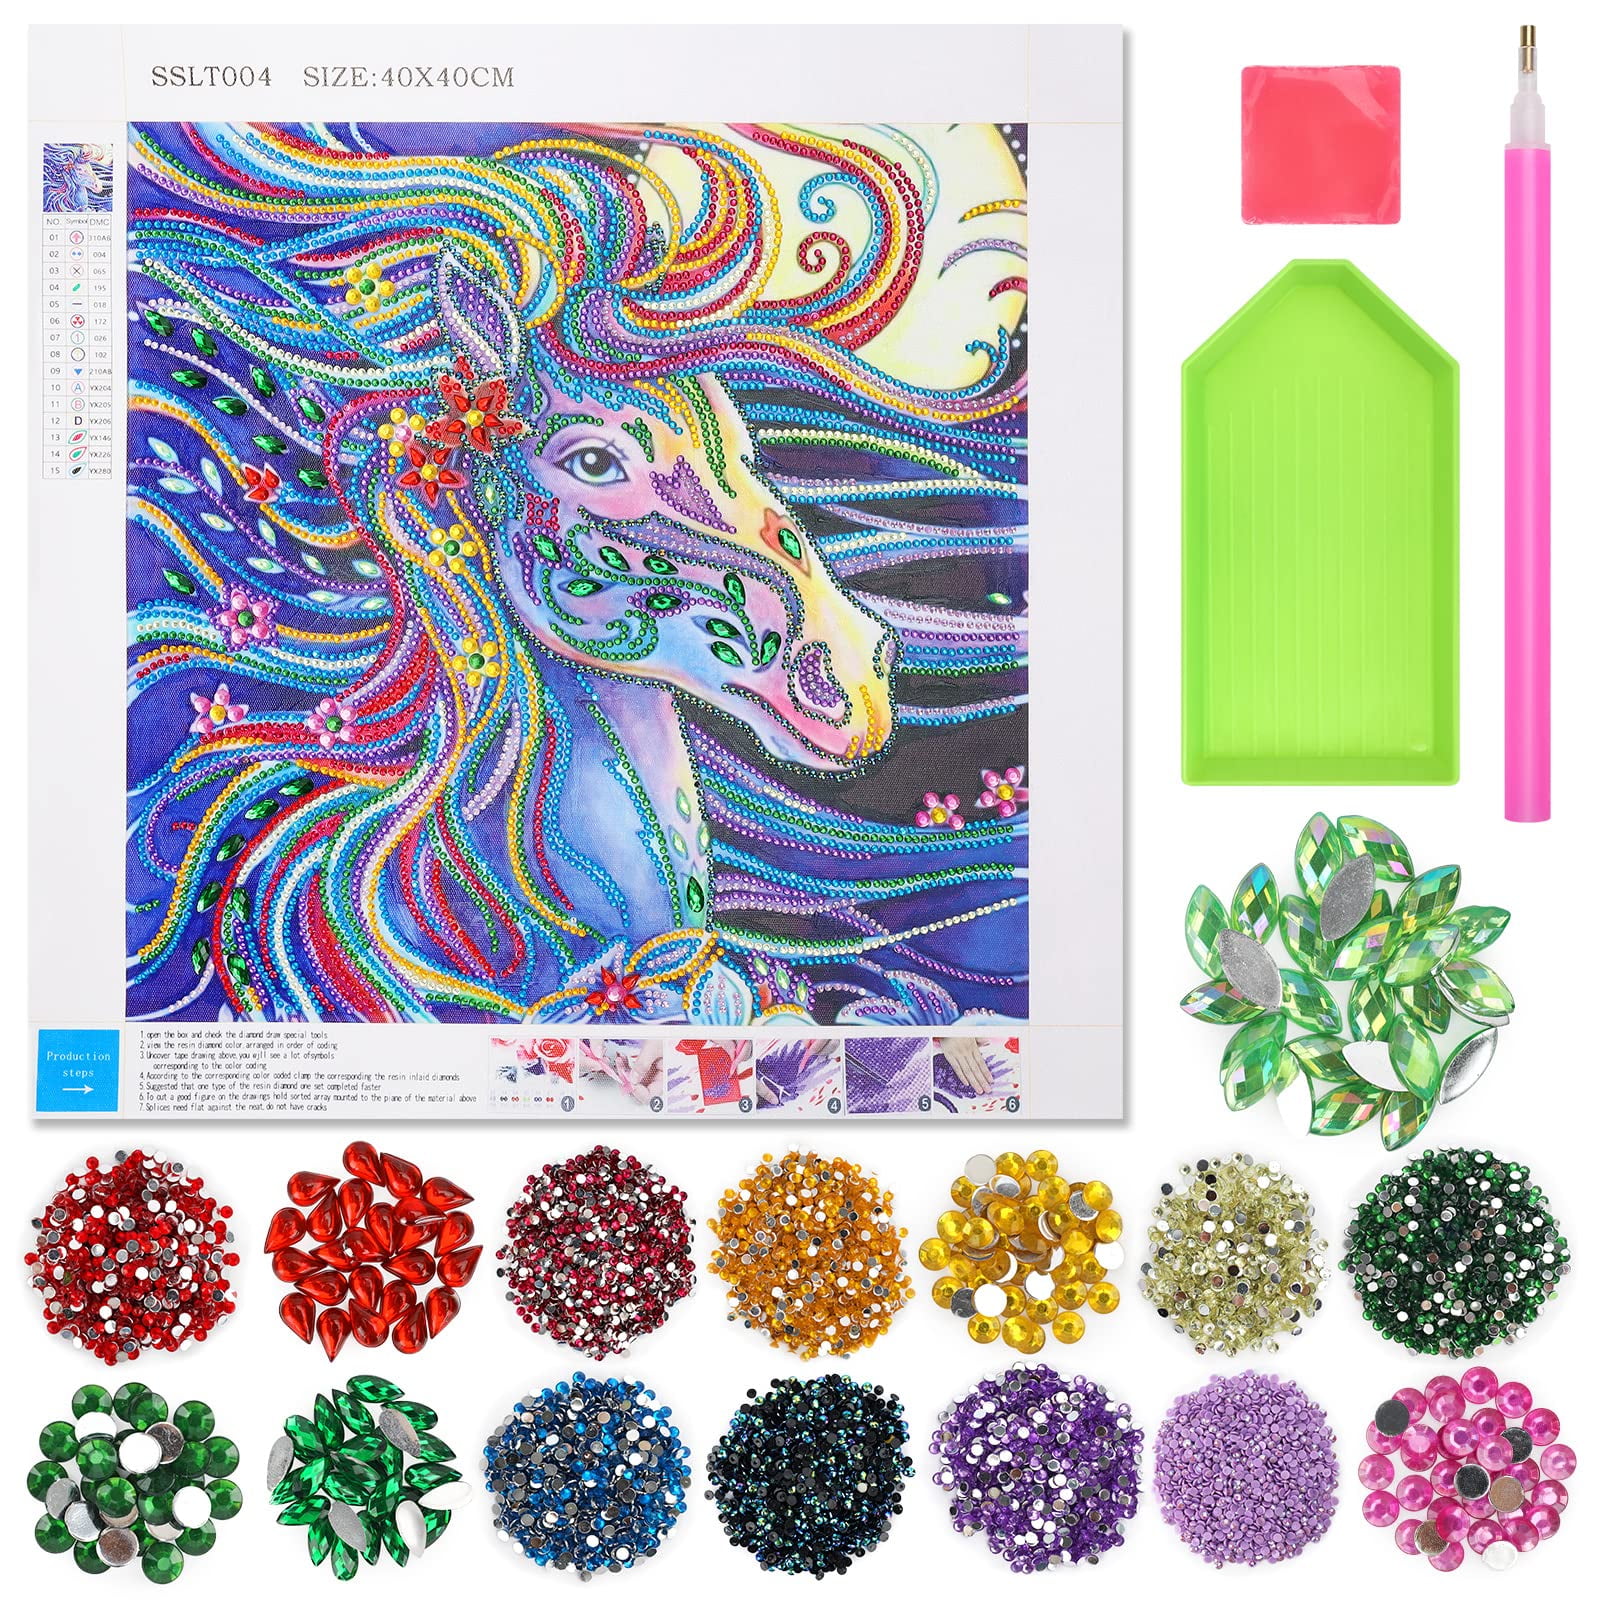 Diamonds Painting Kits for Kids, Diamond Gem Art Crafts for Kids Boys Girls Ages 8-12 DIY Christmas Gifts,Cute Crystal Diamond Dots for Beginner